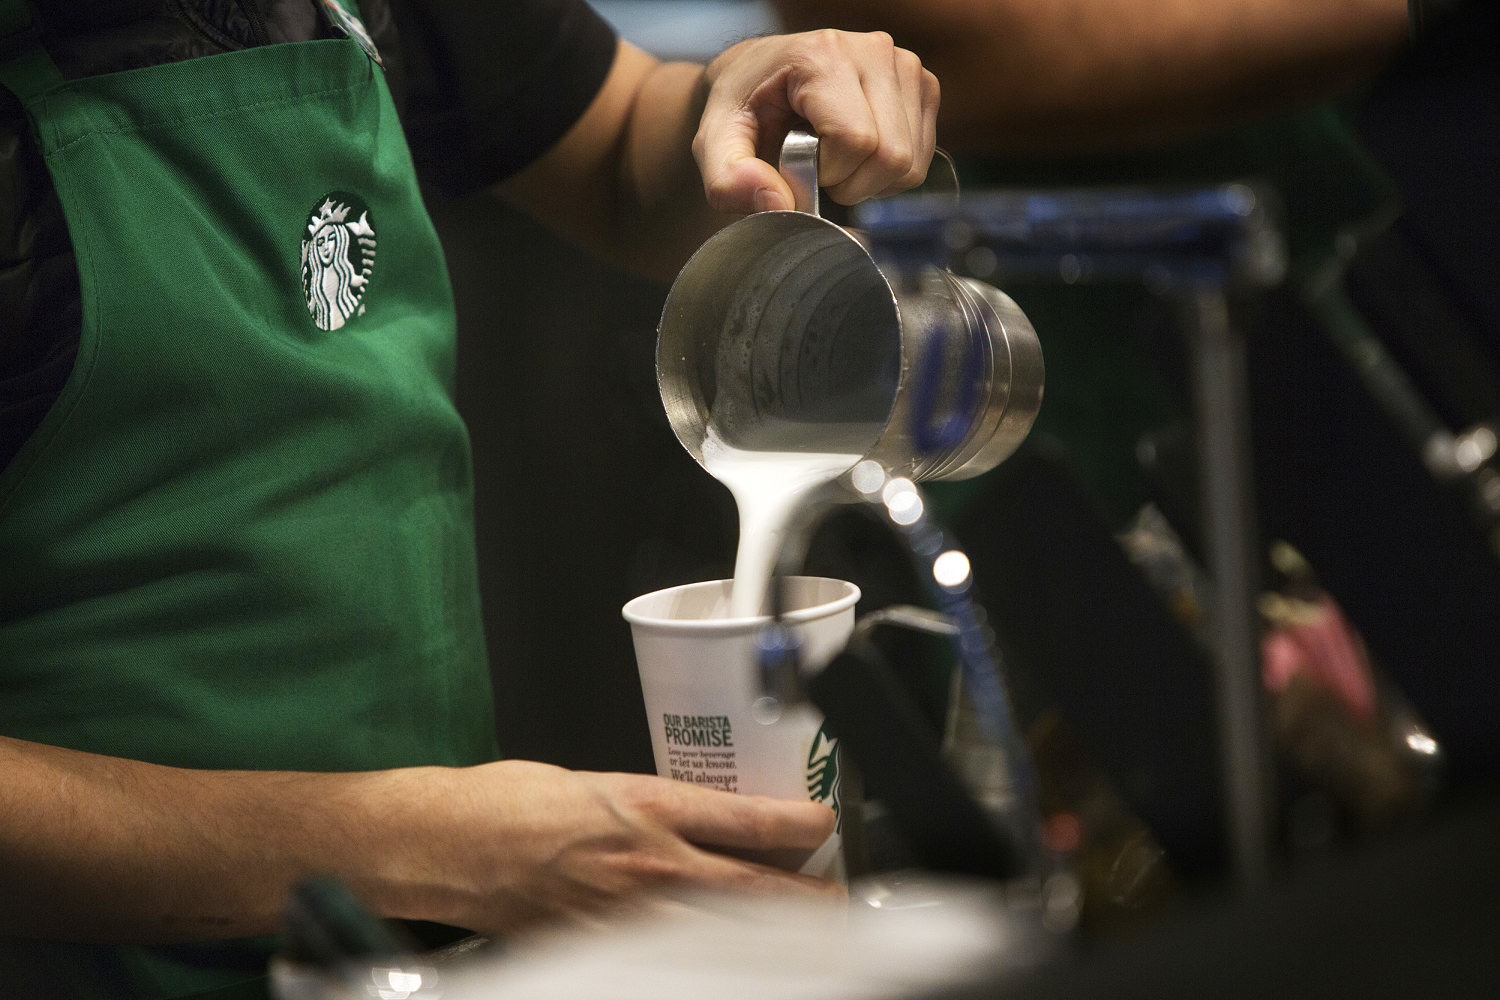 Microsoft outage takes down Starbucks mobile ordering, causing chaos for baristas